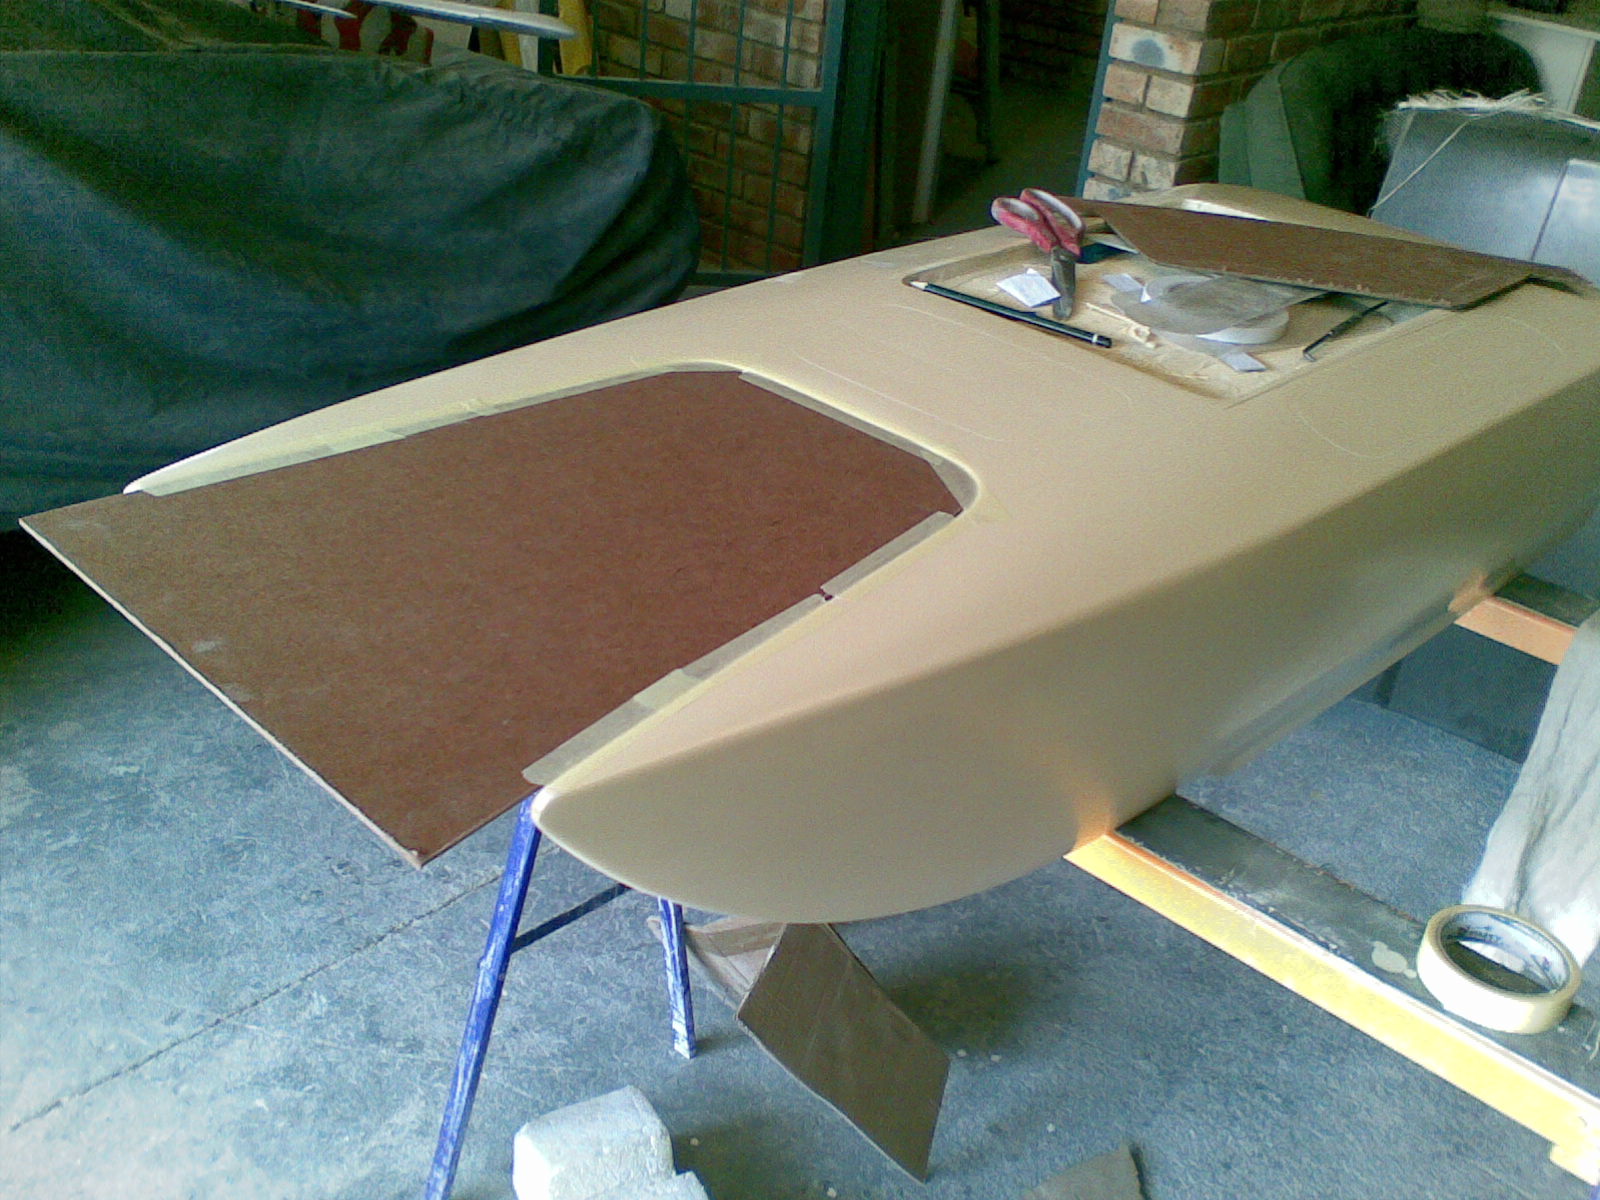 rc bait boat plans rc bait boat plans wooden sailboats for free